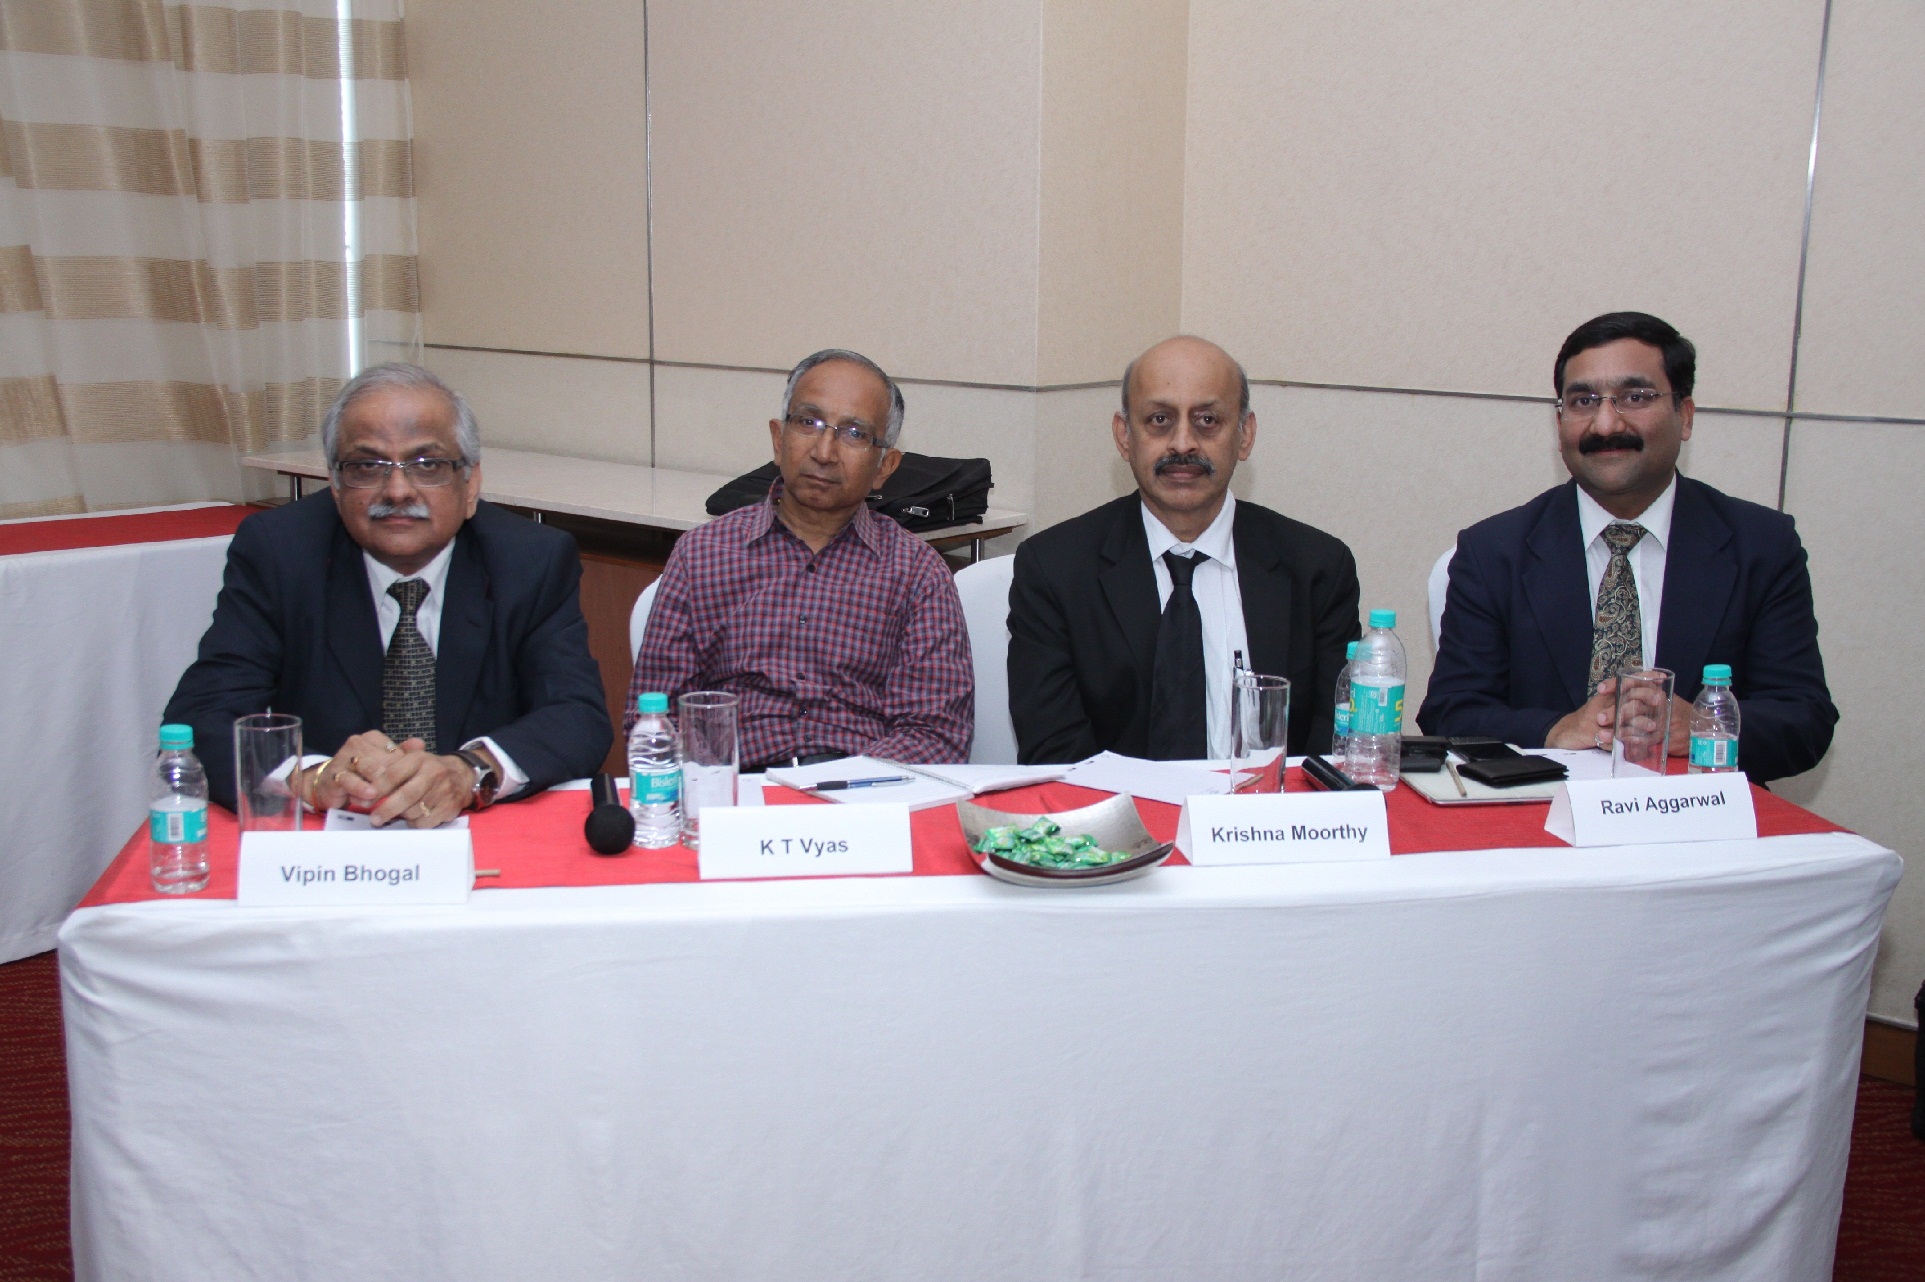 Speaker panel (L-R) Vipin Bhogal  Consultant  Steibeis;K.T. Vyas  Indus...